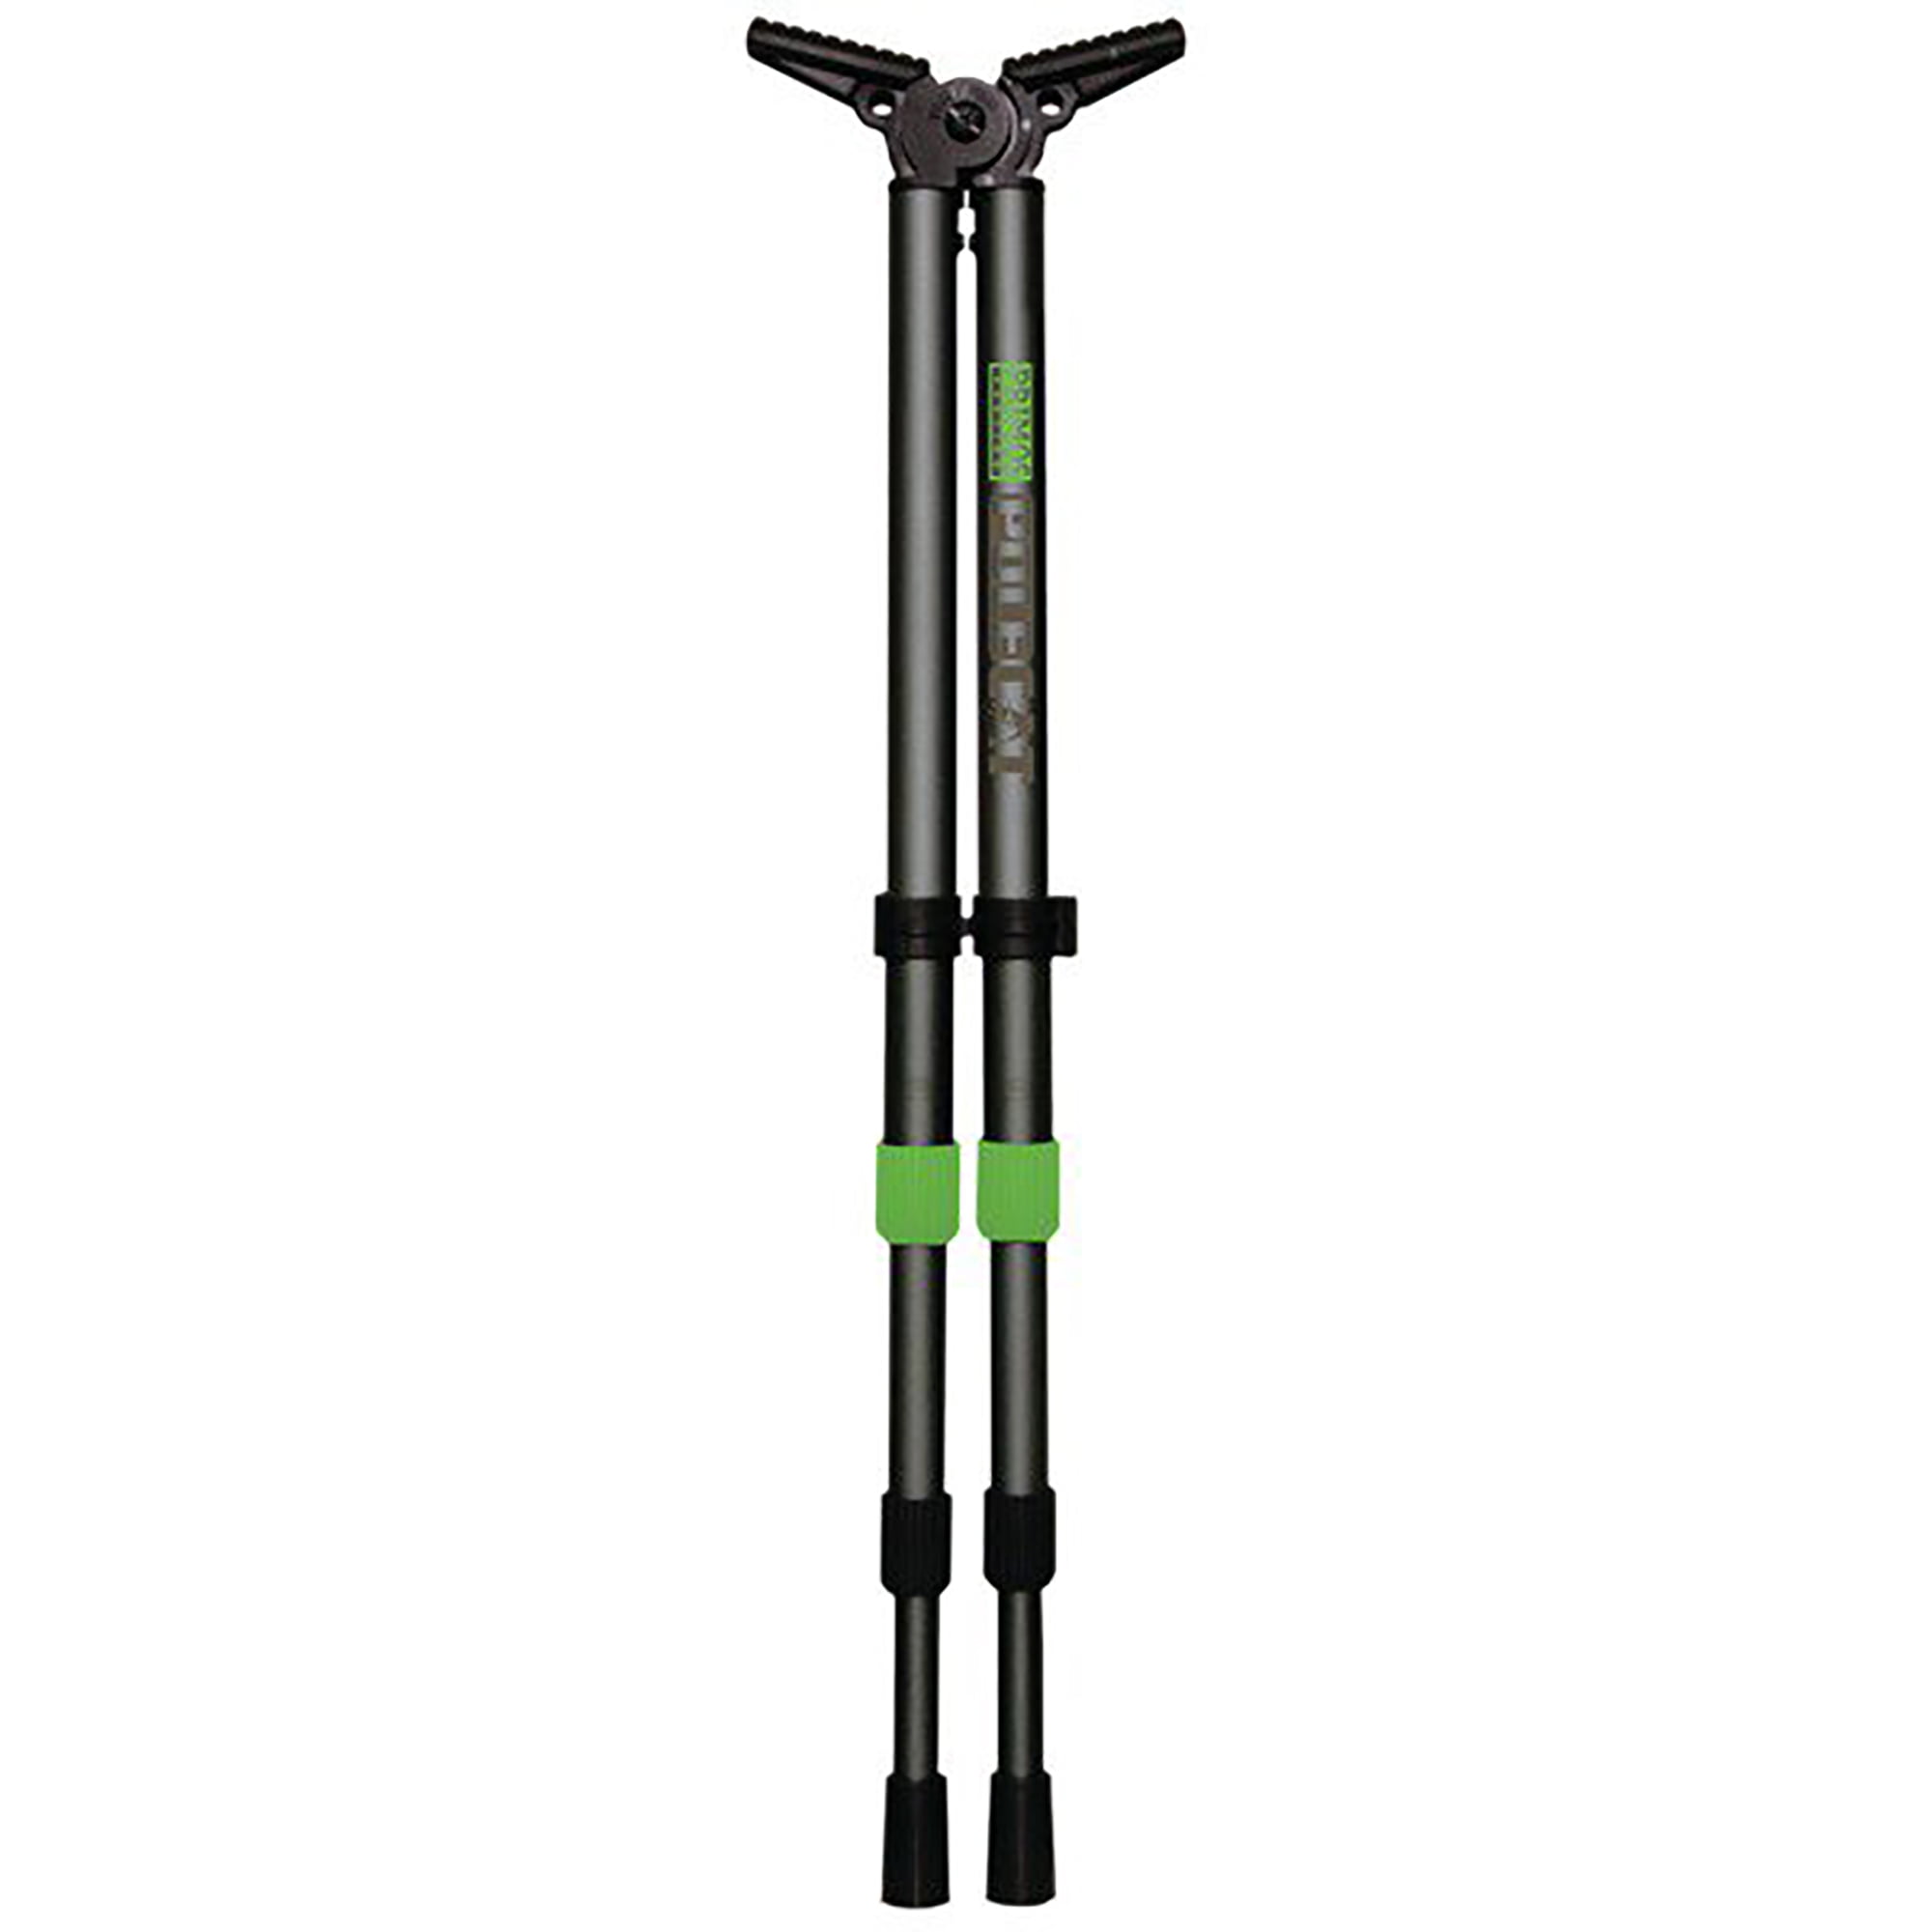 Primos Pole Cat 25 to 62-Inch Tall Bipod for sale online 